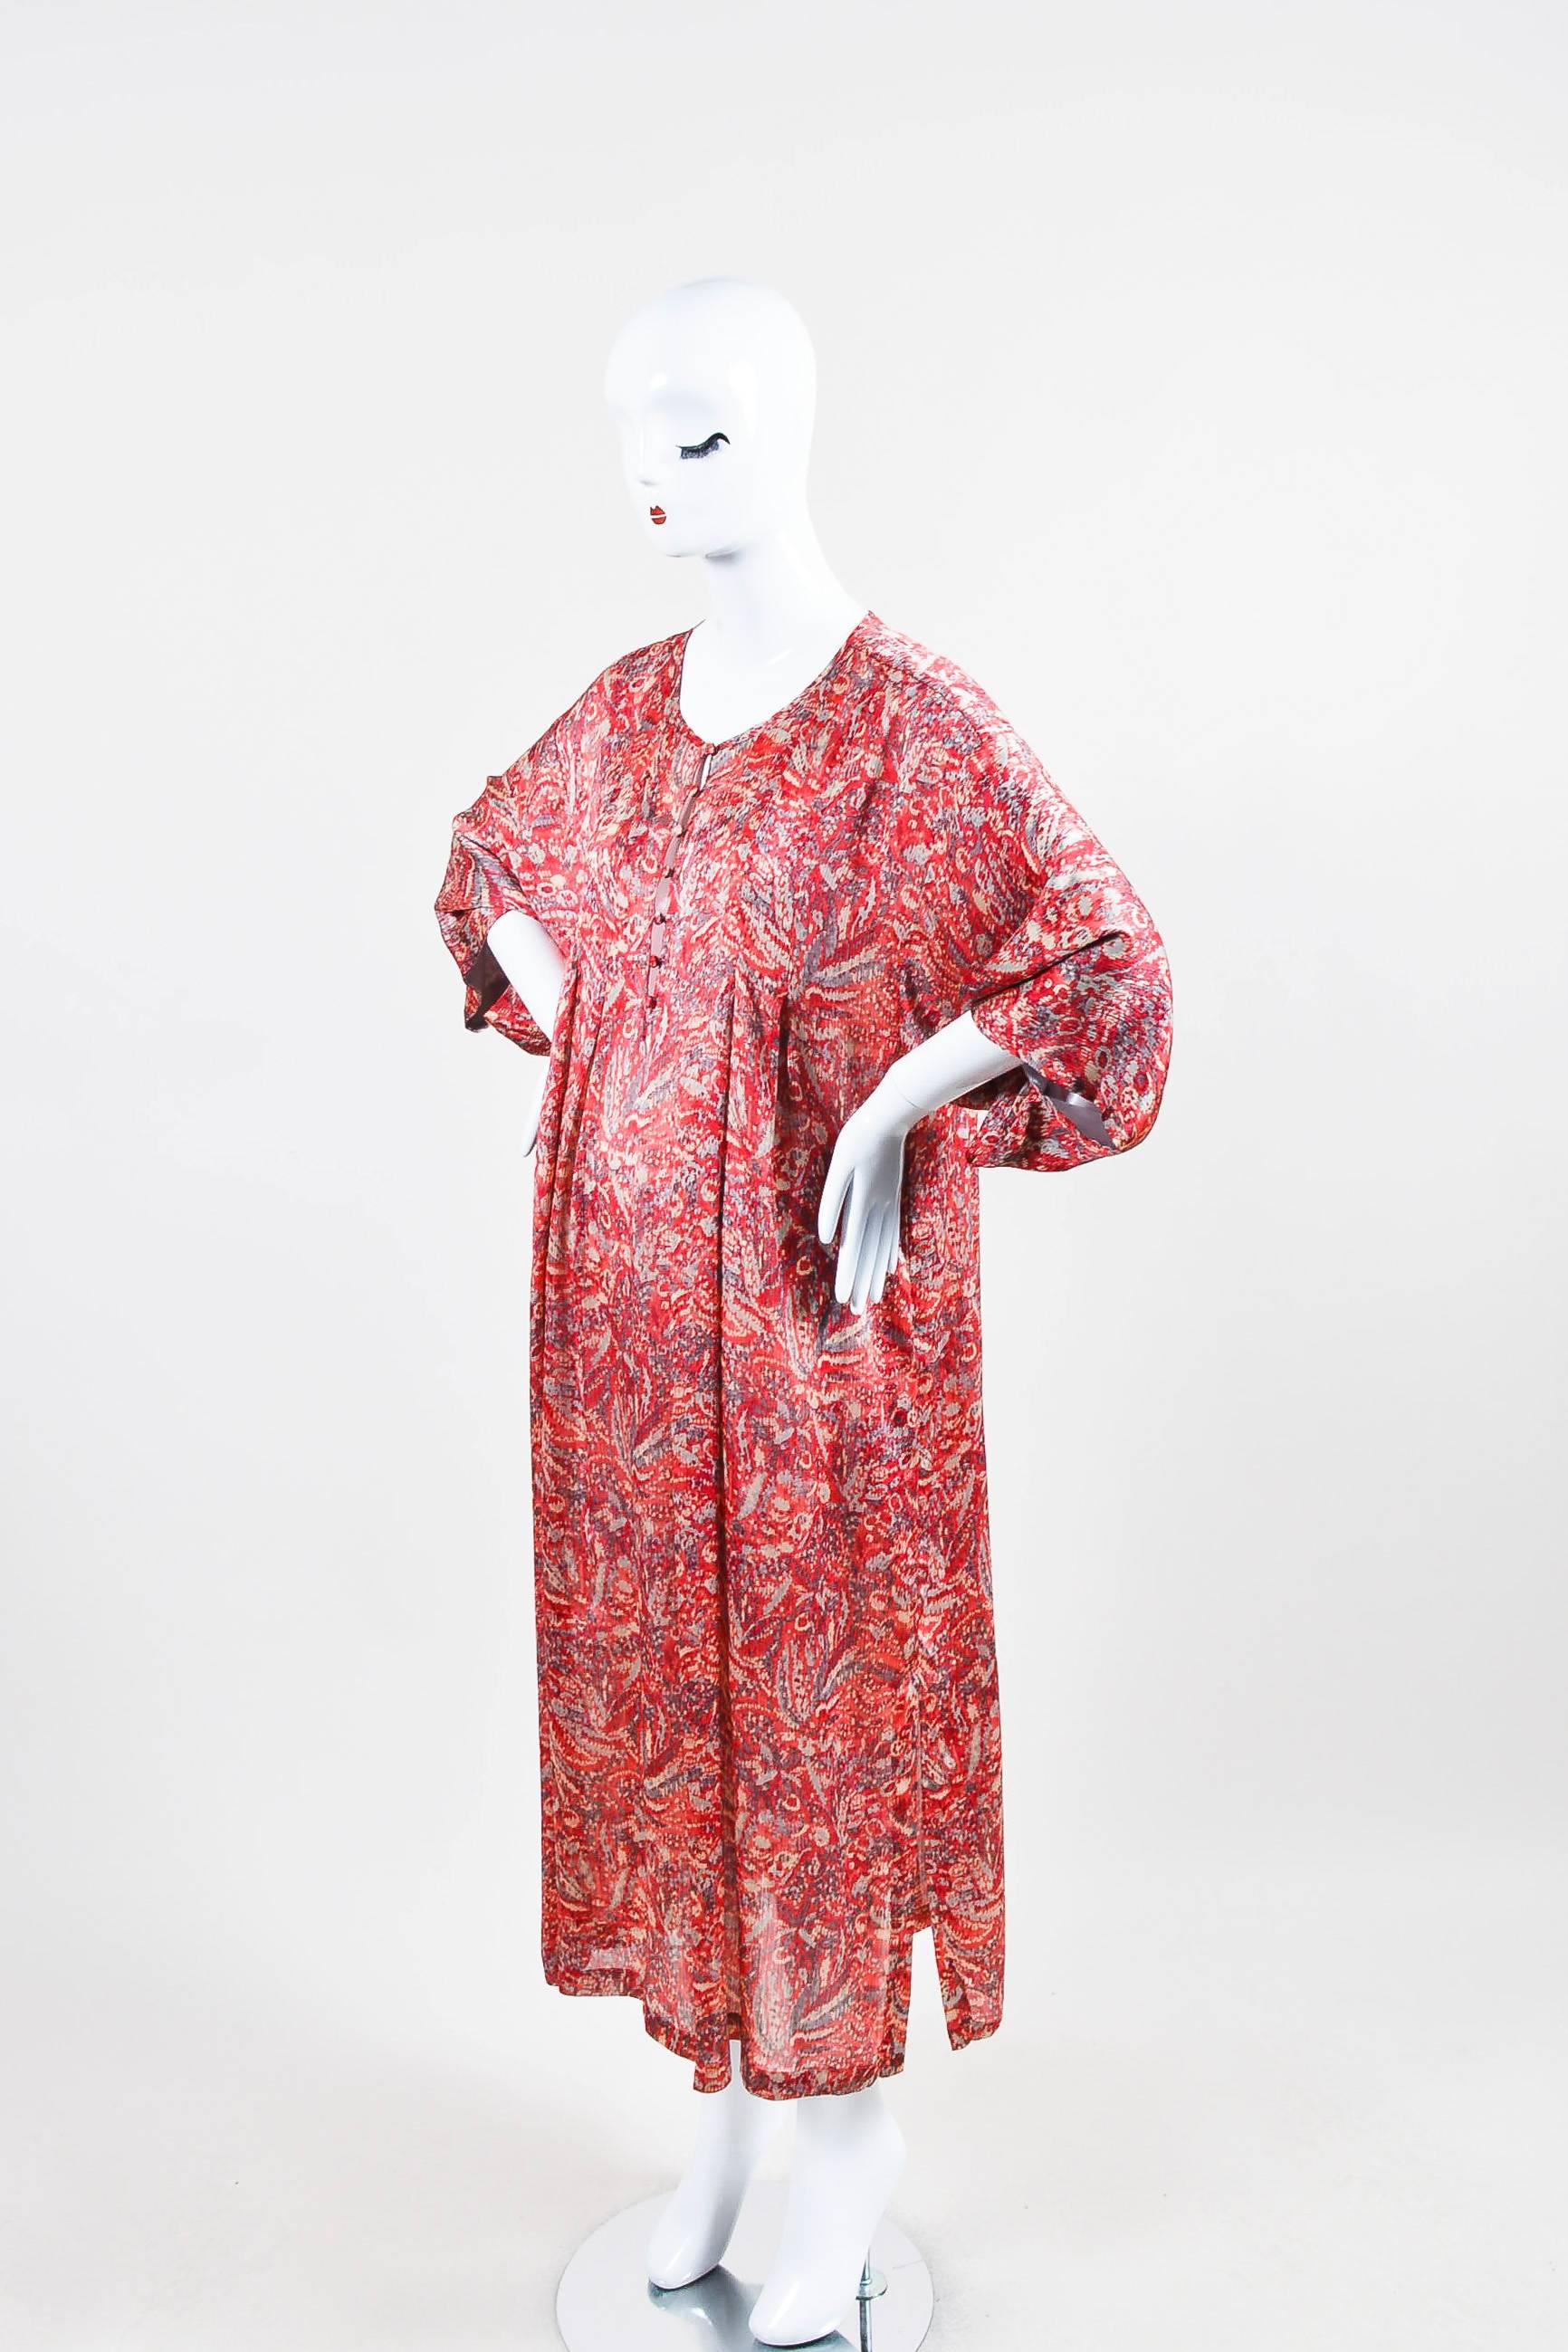 Constructed of luxe satin, this oversize muumuu-style dress is perfect for lounging with its wide sleeves, buttoned partial front placket, scoop neck, inverted pleats radiating from the bust and yoke, and relaxed fit. All-over multicolored print.